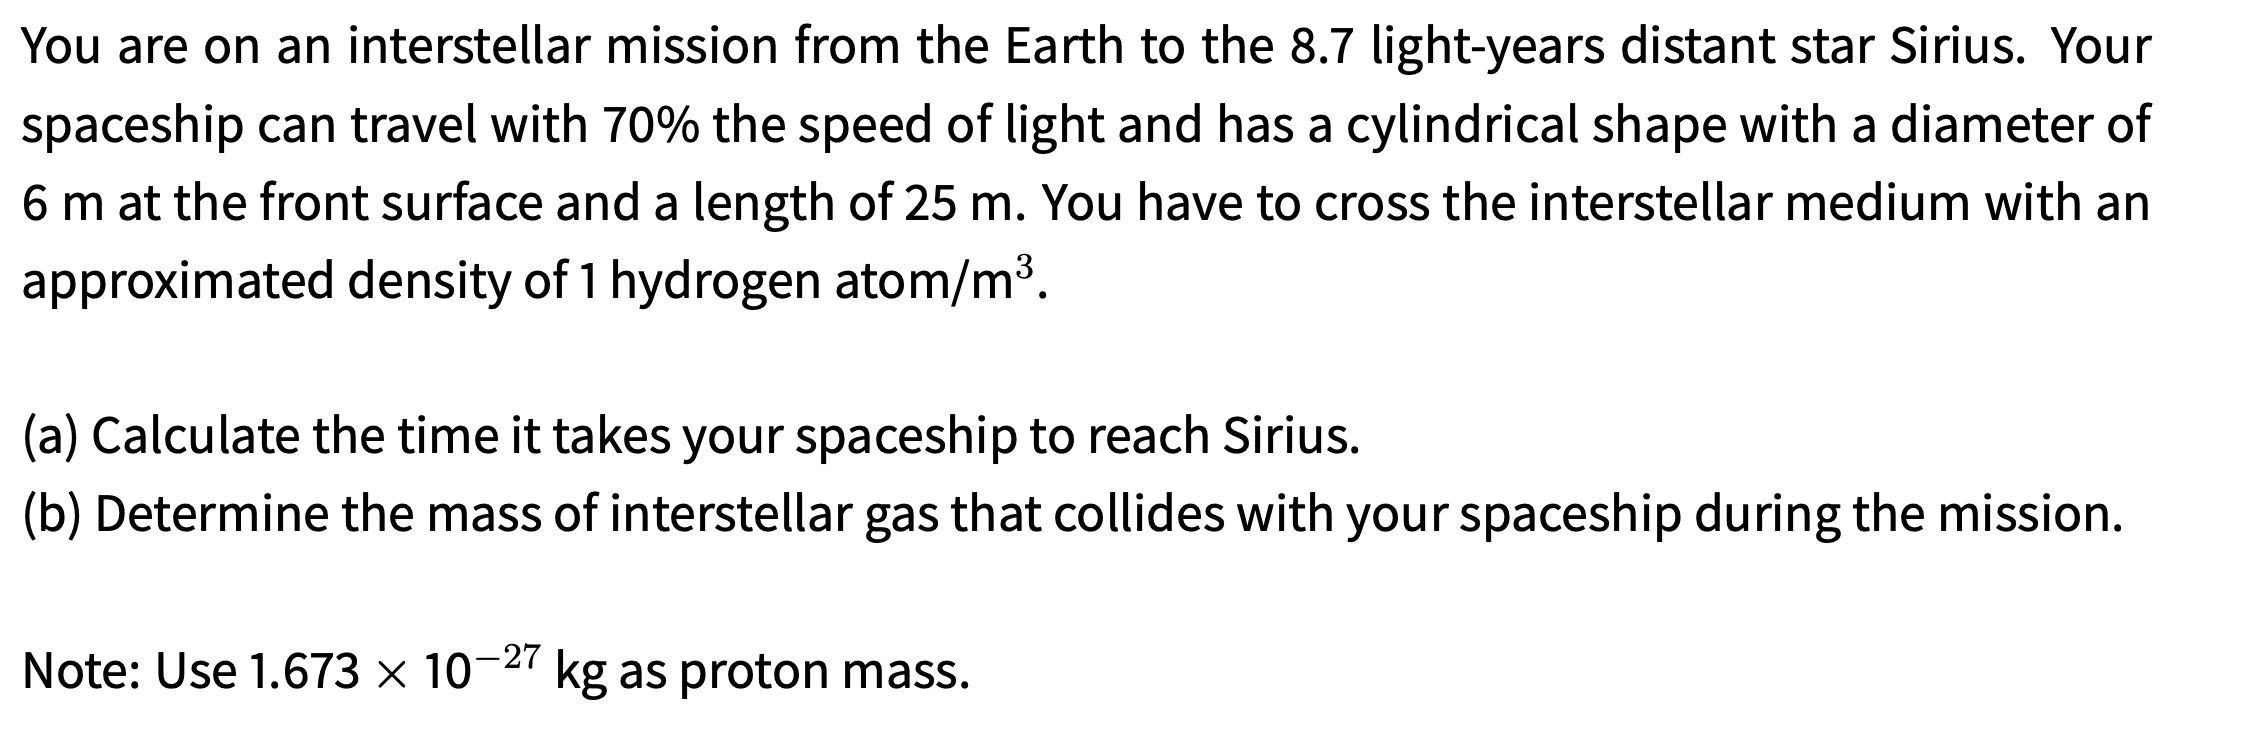 You are on an interstellar mission from the Earth to the 8.7 light-years distant star Sirius. Your
spaceship can travel with 70% the speed of light and has a cylindrical shape with a diameter of
6m at the front surface and a length of 25 m. You have to cross the interstellar medium with an
approximated density of 1 hydrogen atom/m³.
(a) Calculate the time it takes your spaceship to reach Sirius.
(b) Determine the mass of interstellar gas that collides with your spaceship during the mission.
Note: Use 1.673 × 10¬27 kg as proton mass.
